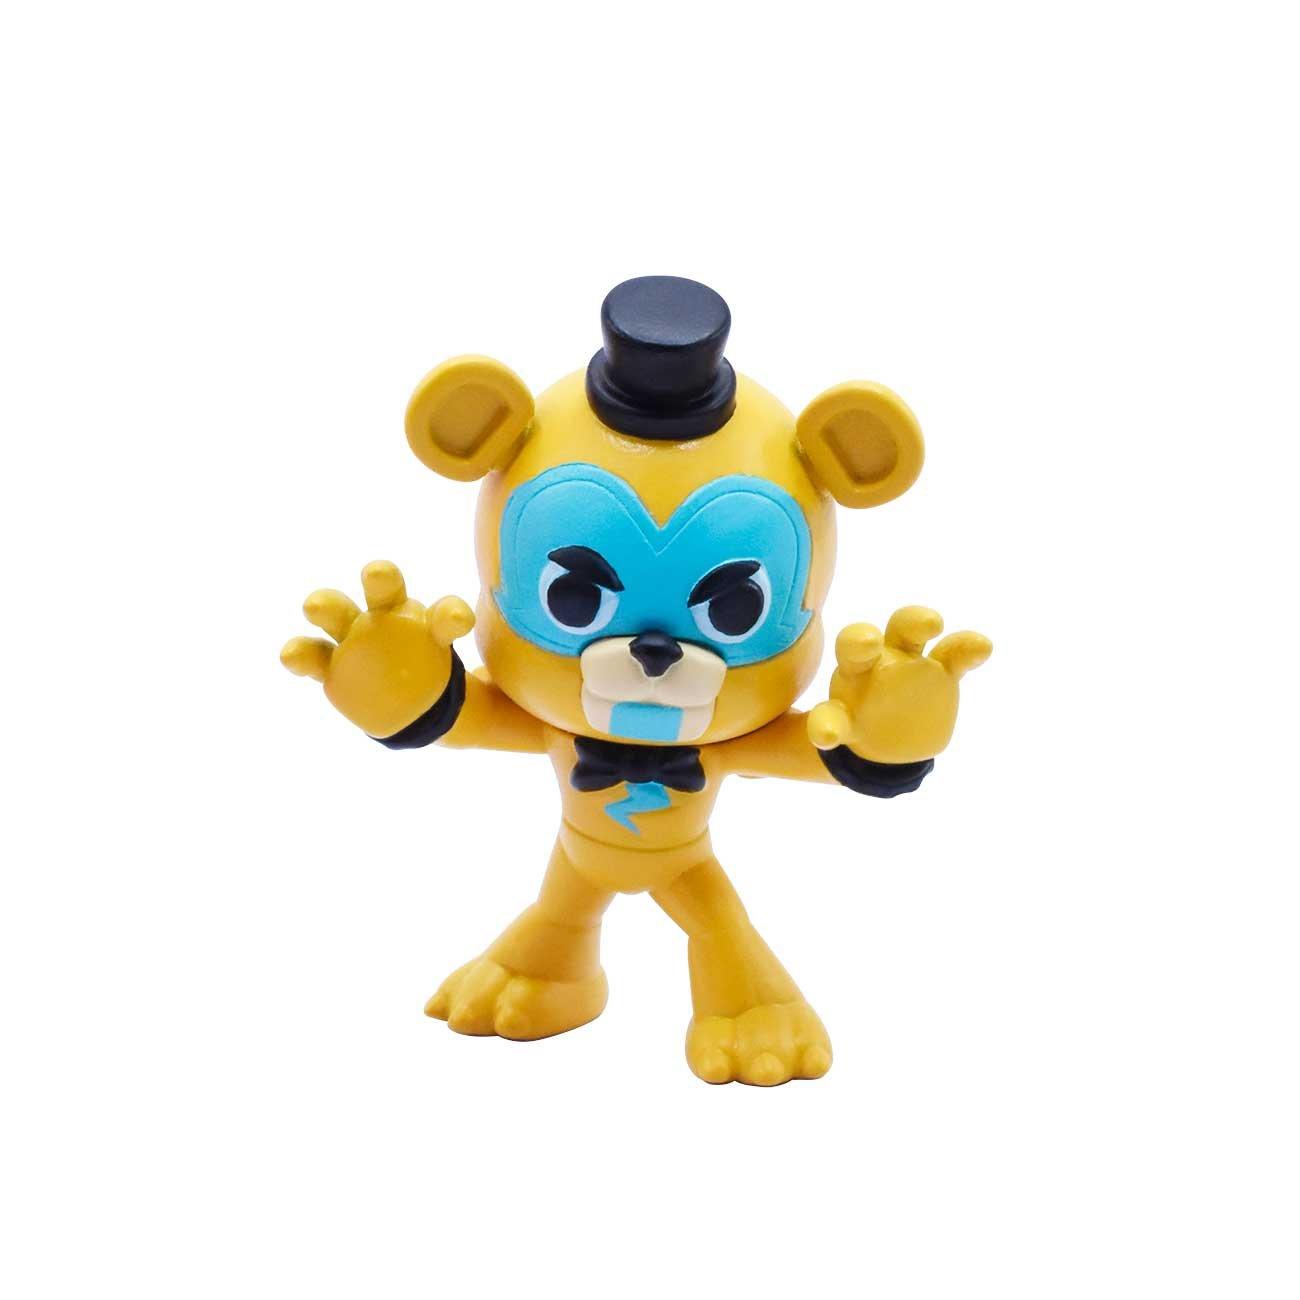  Just Toys LLC Five Nights at Freddy's Security Breach